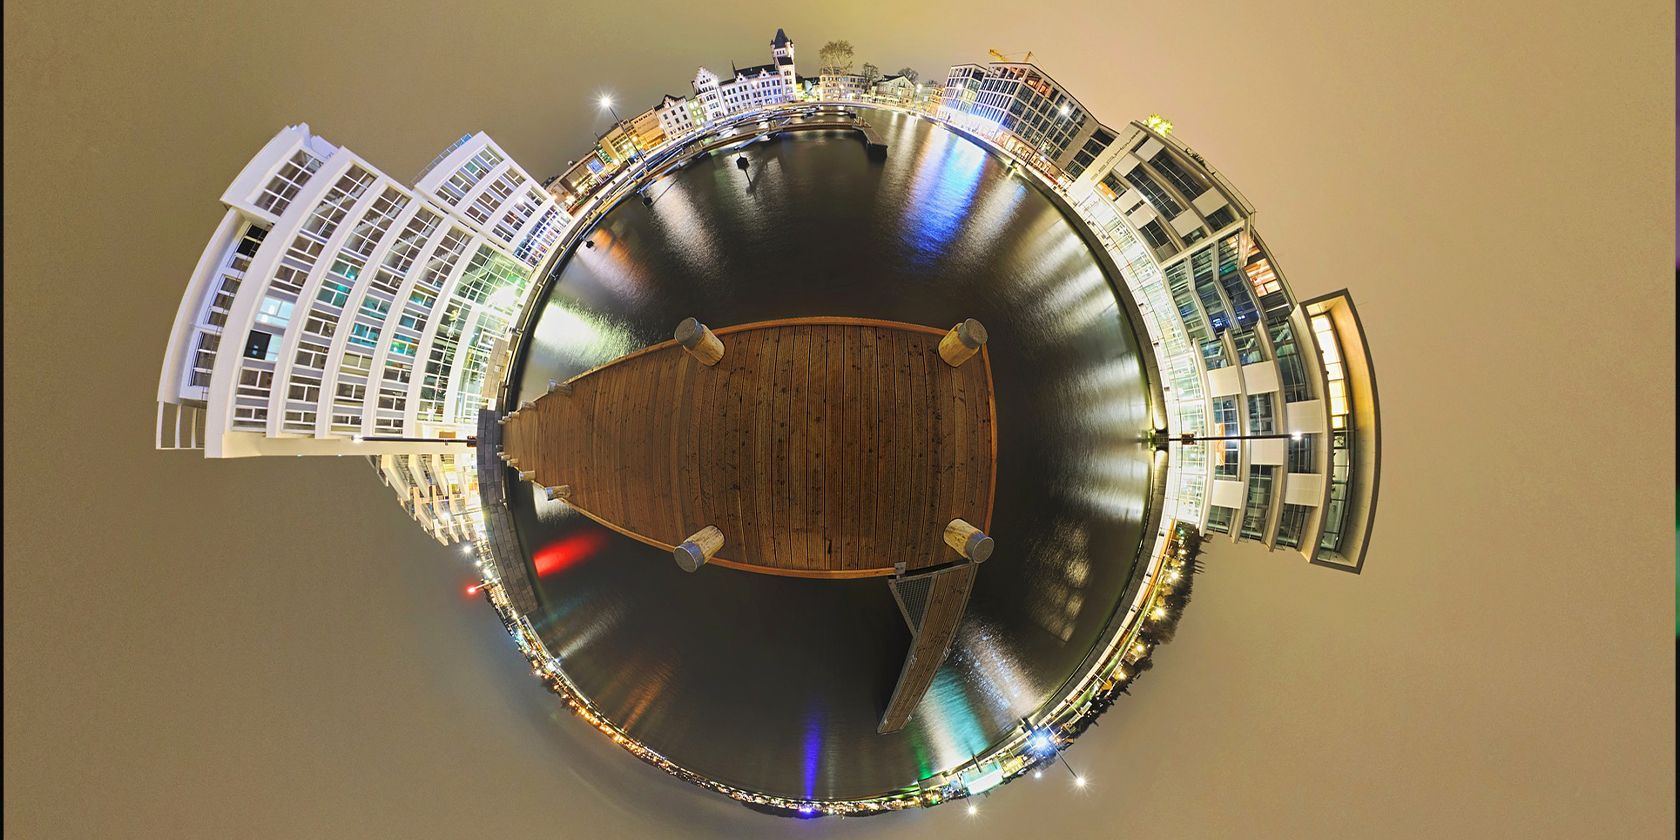 How to Create a 360 Photo Using Google Street View